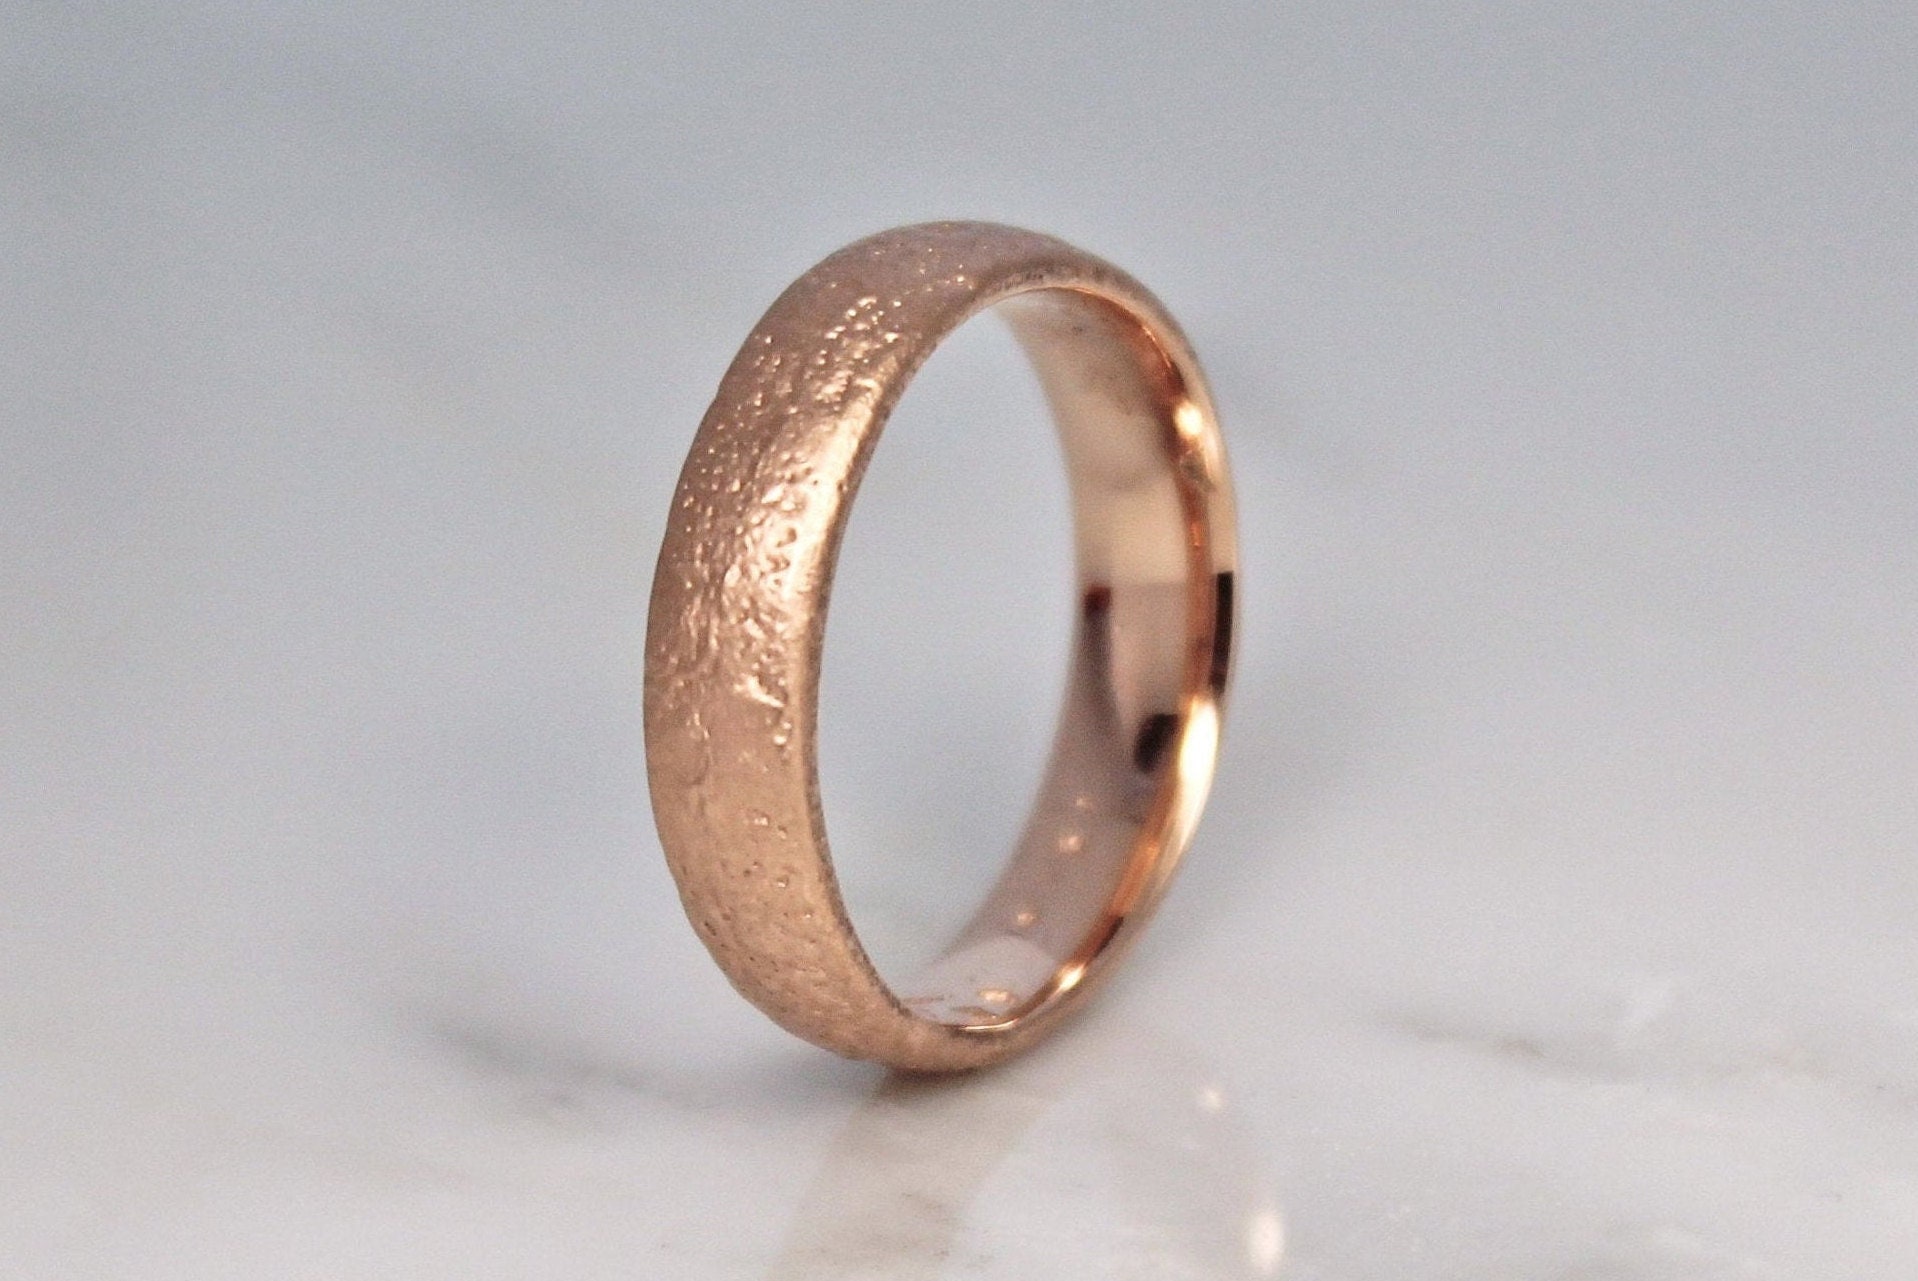 18Ct Rose Gold Sand Cast Ring, Rustic Wedding Band, 5mm Textured Unique Design By Woodengold